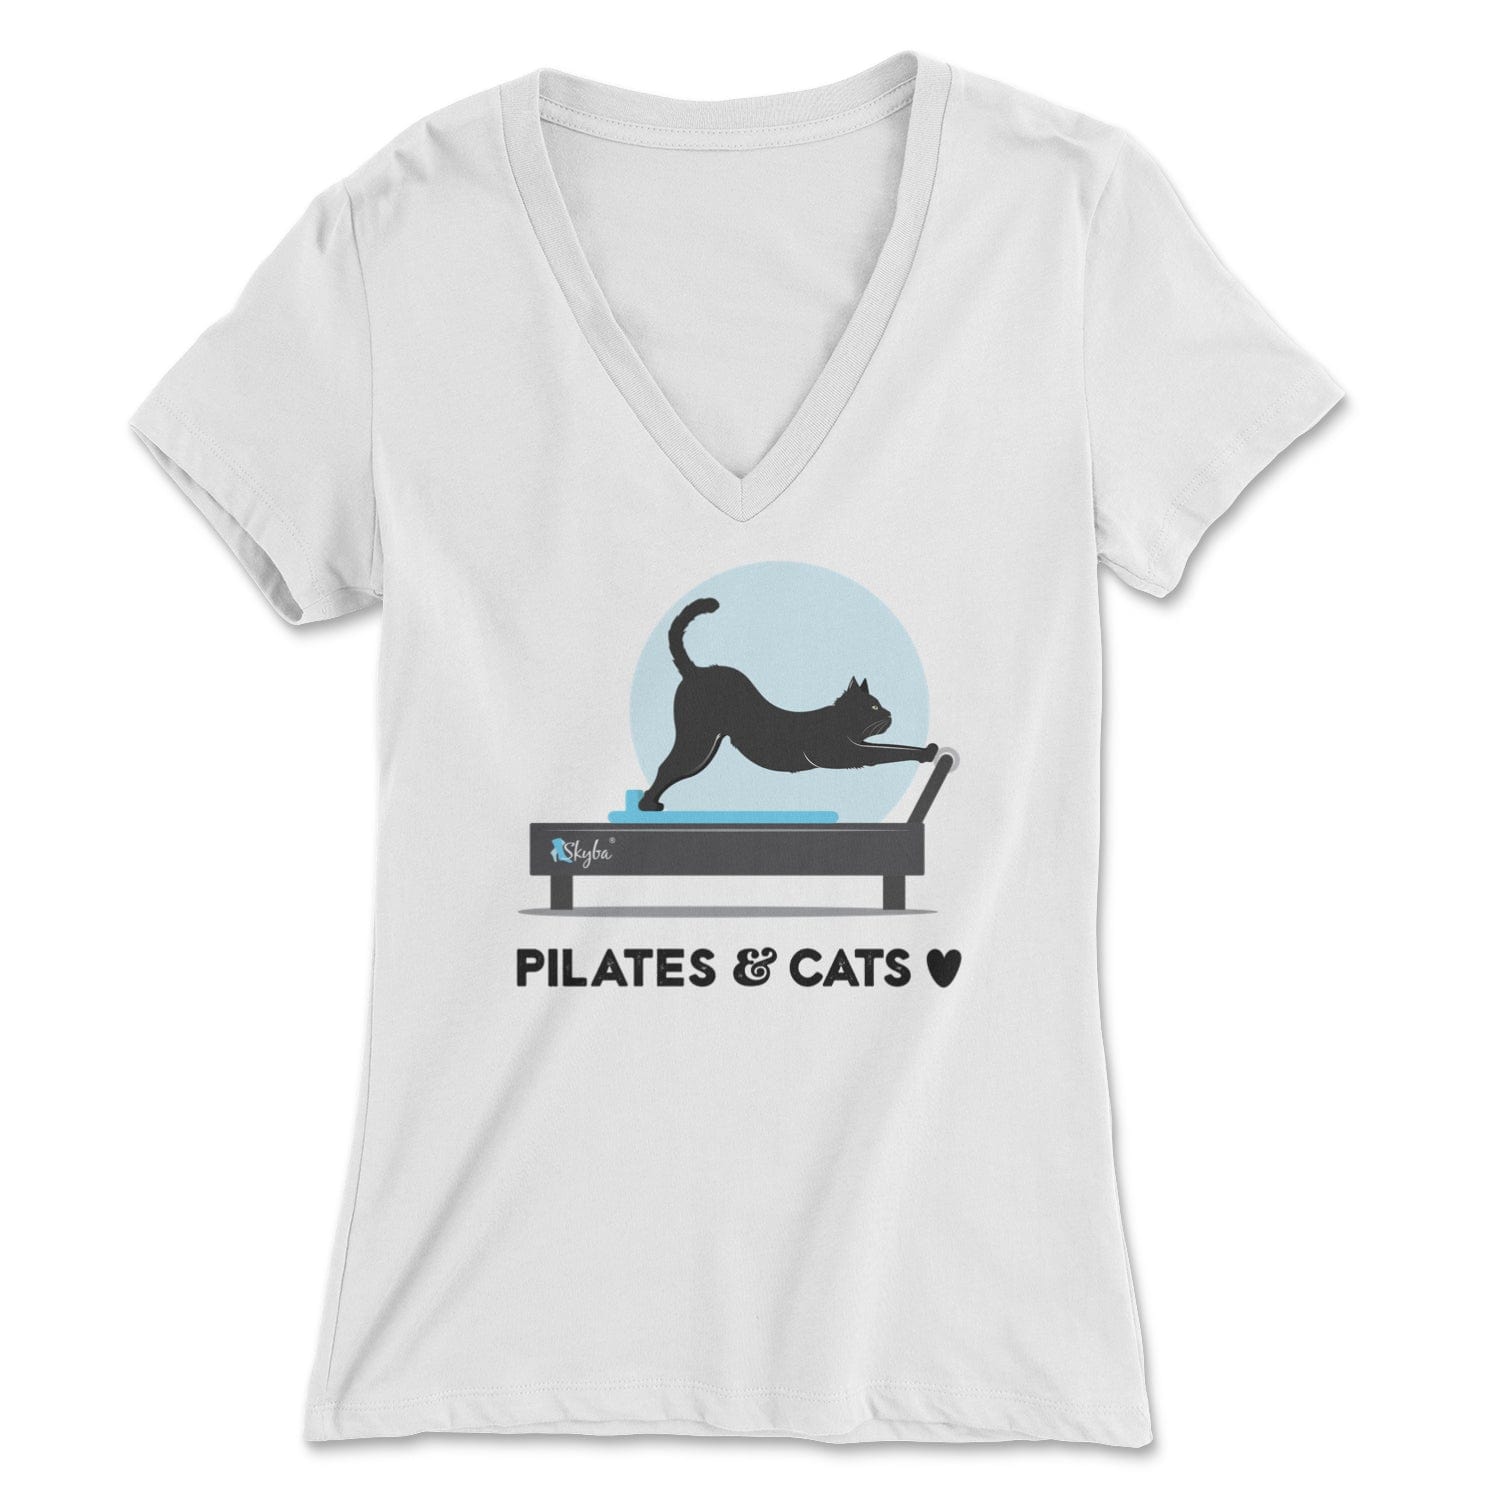 "Pilates & Cats" on the Reformer - Women's V-Neck Tee Skyba Print Material